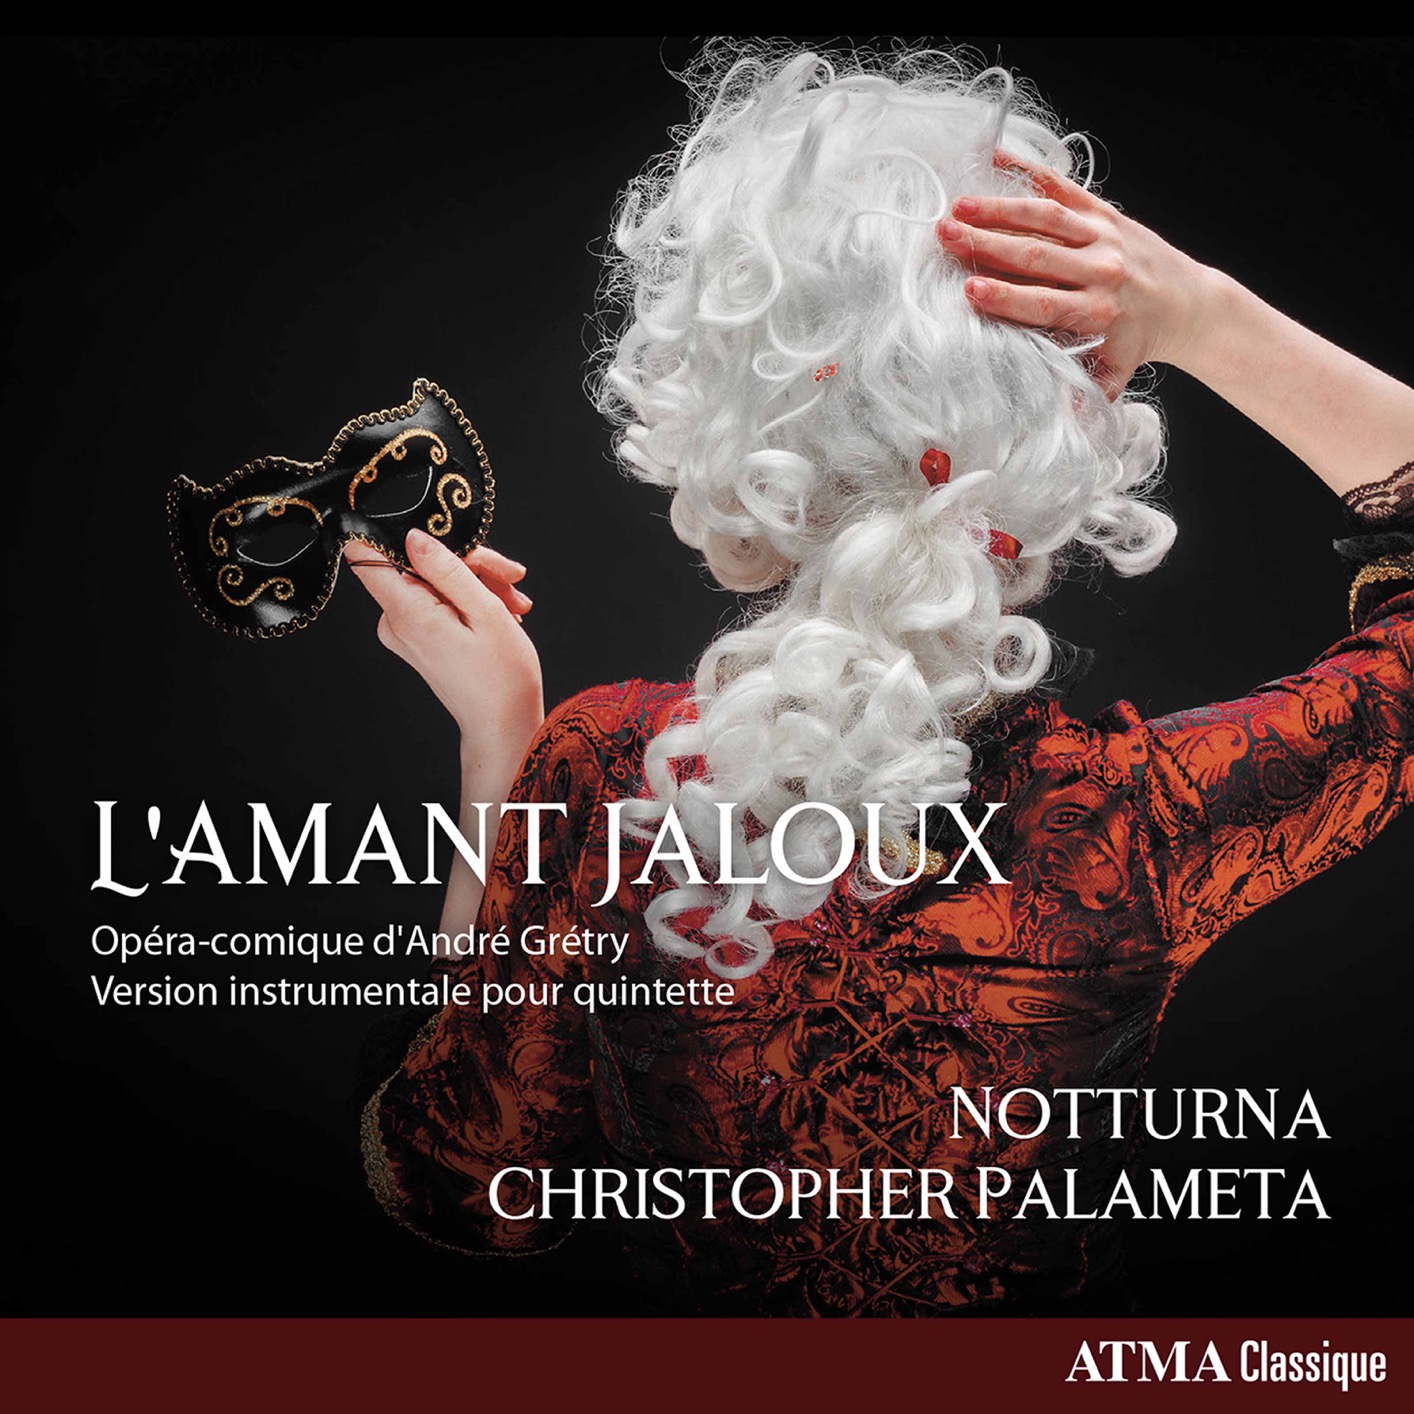 Notturna – Gretry – L’amant jaloux (Arr. for Mixed Chamber Ensemble) (2020) [FLAC 24bit/96kHz]